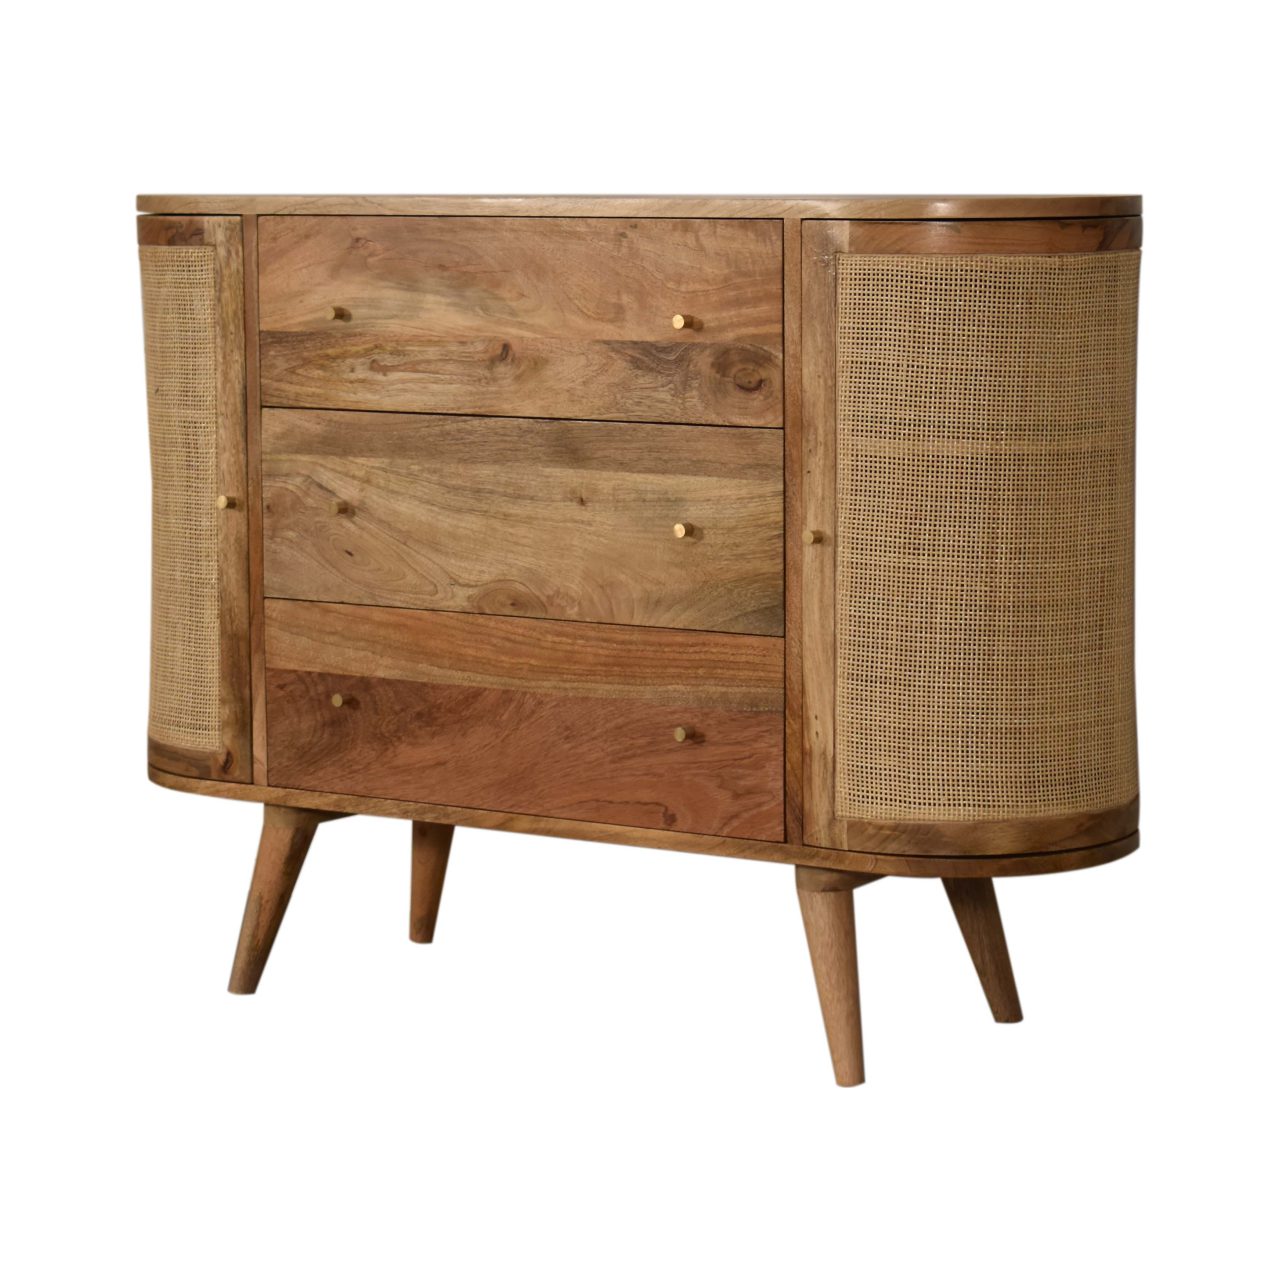 Woven Rattan 3 Drawer Cabinet Solid Wood In Oak Finish